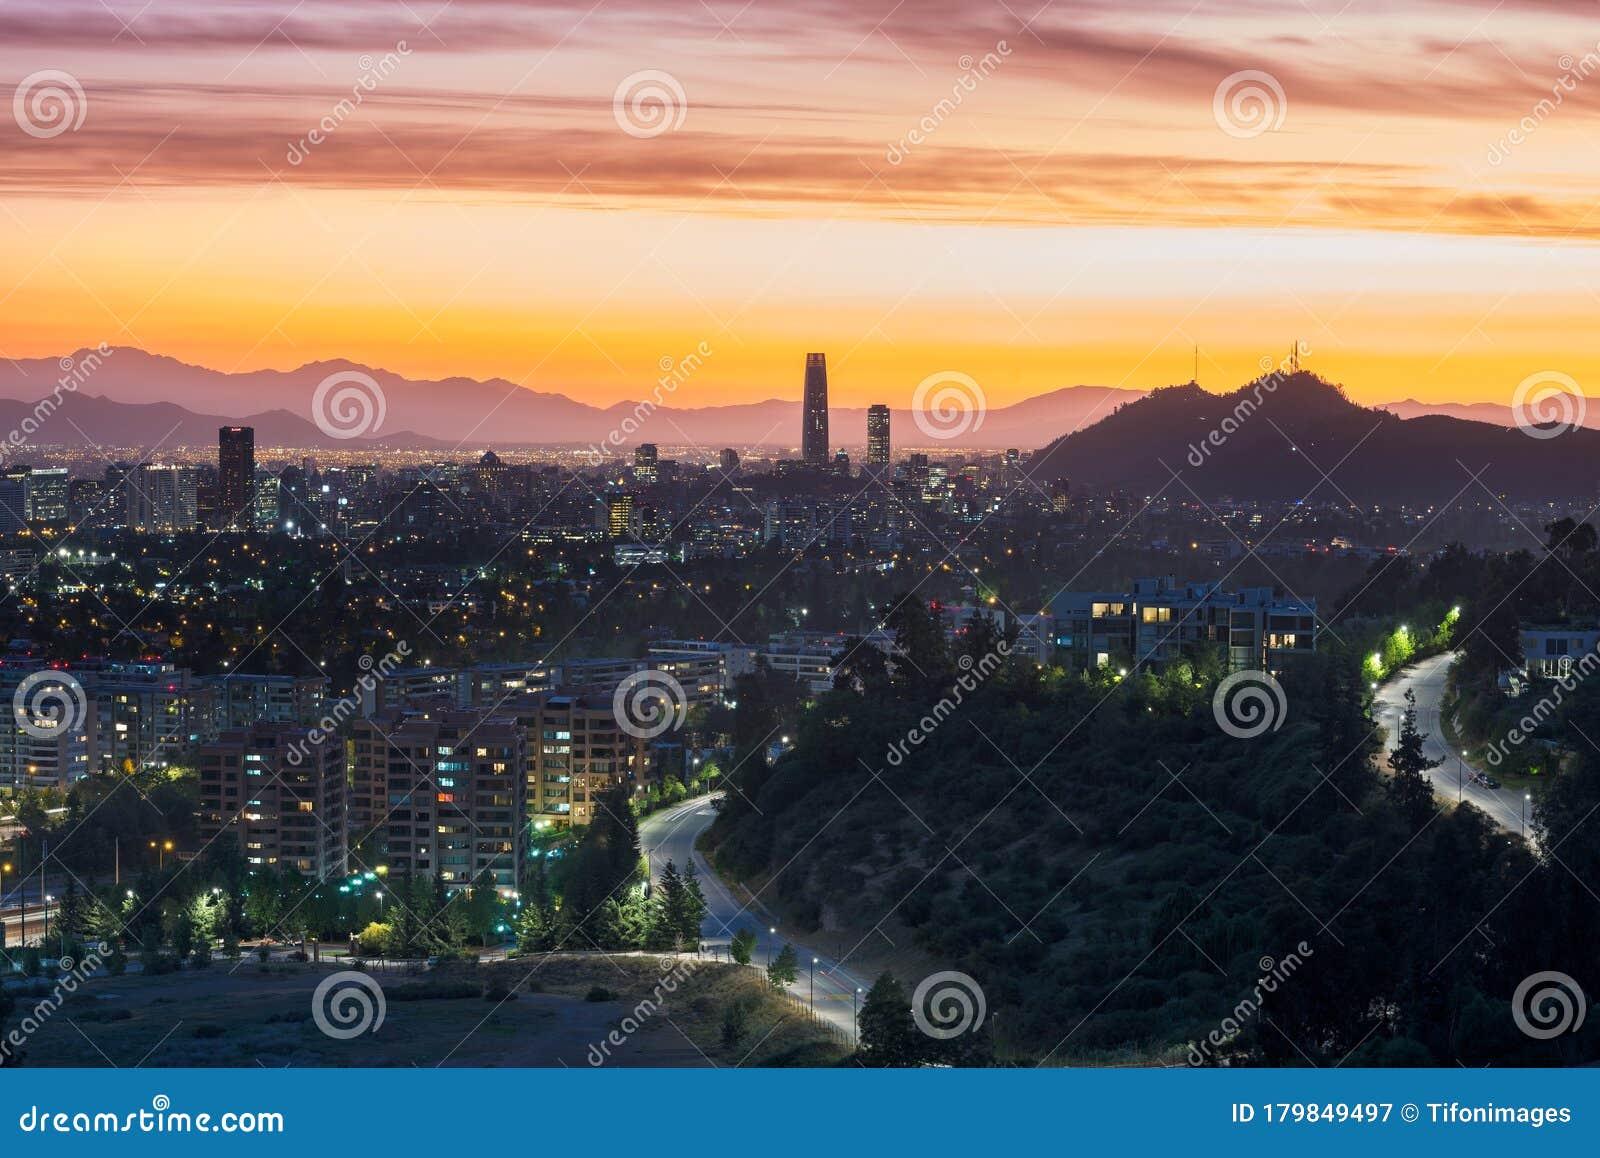 panoramic view of santiago de chile with las condes and vitacura districts